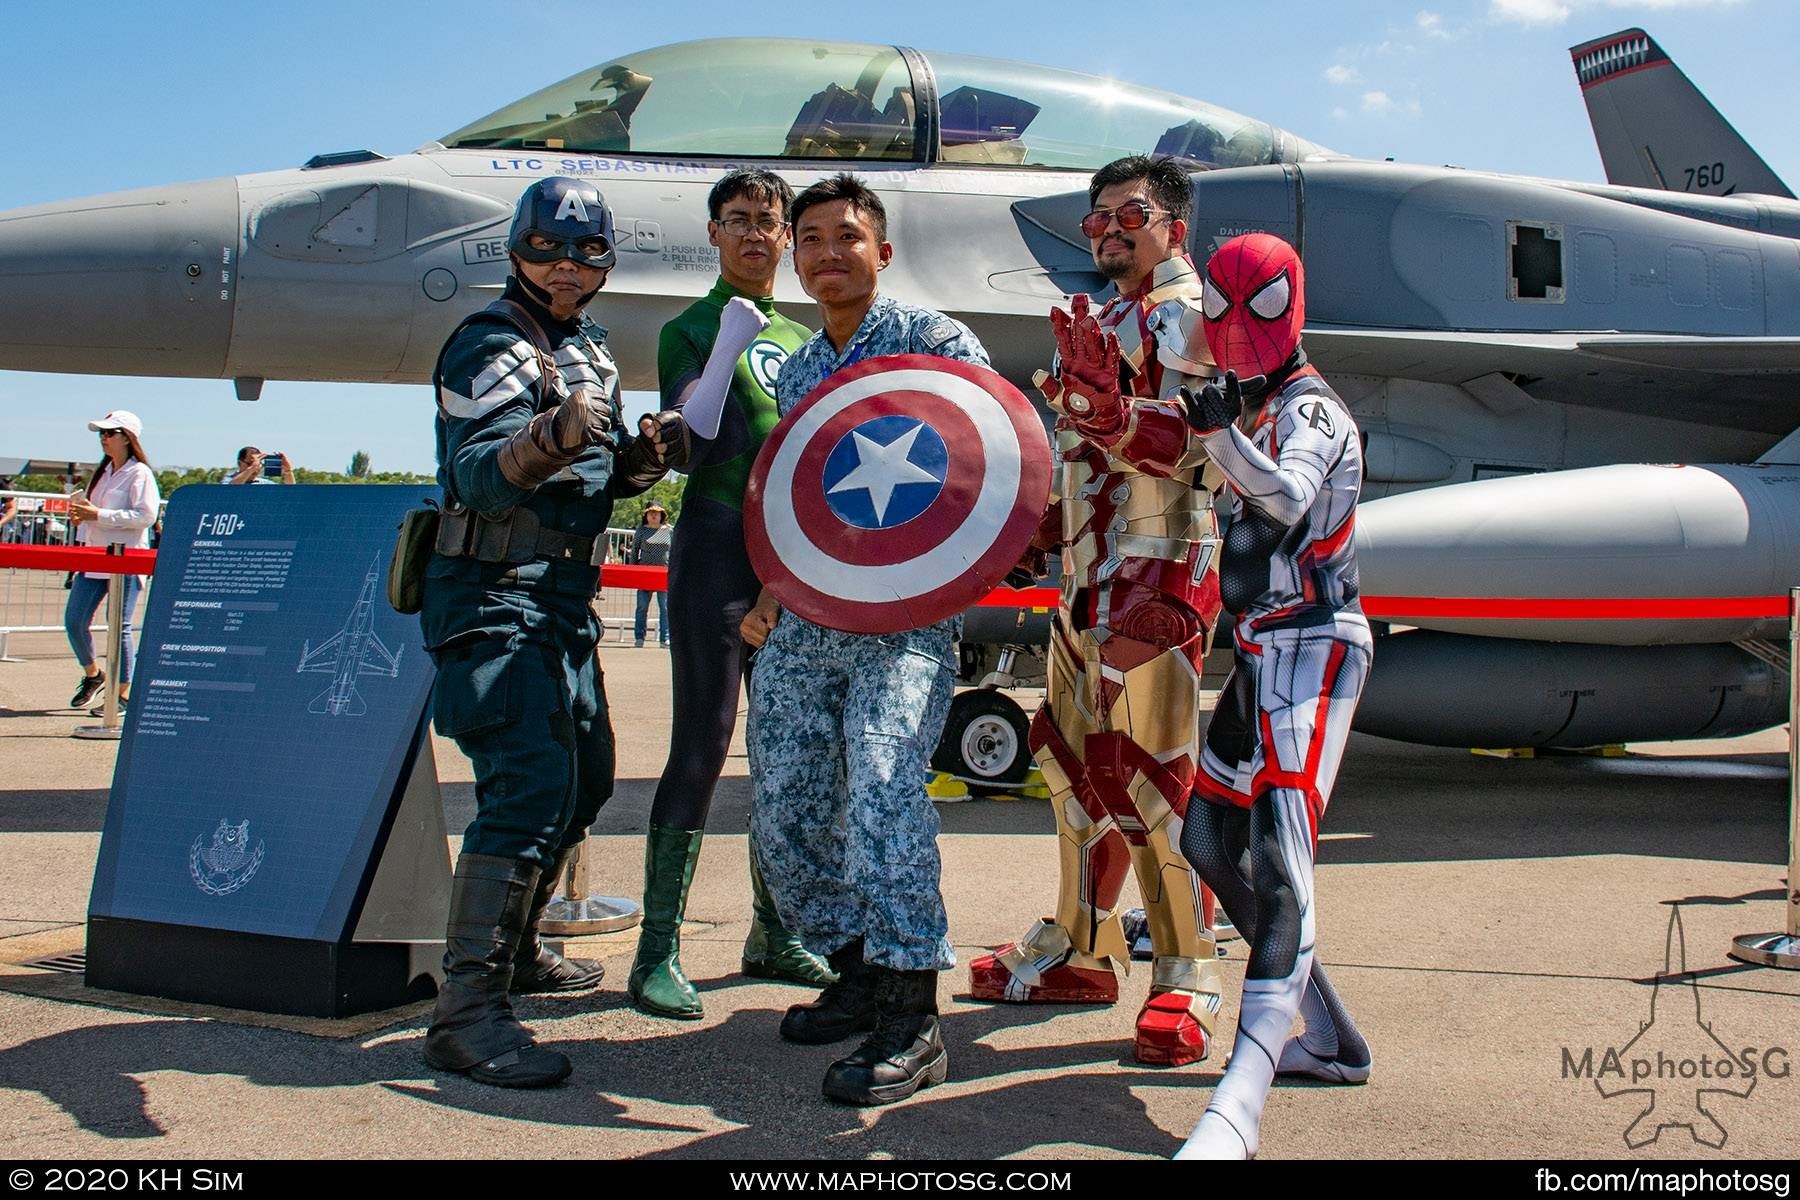 Superheroes appearing in the static aircraft display area during the public days